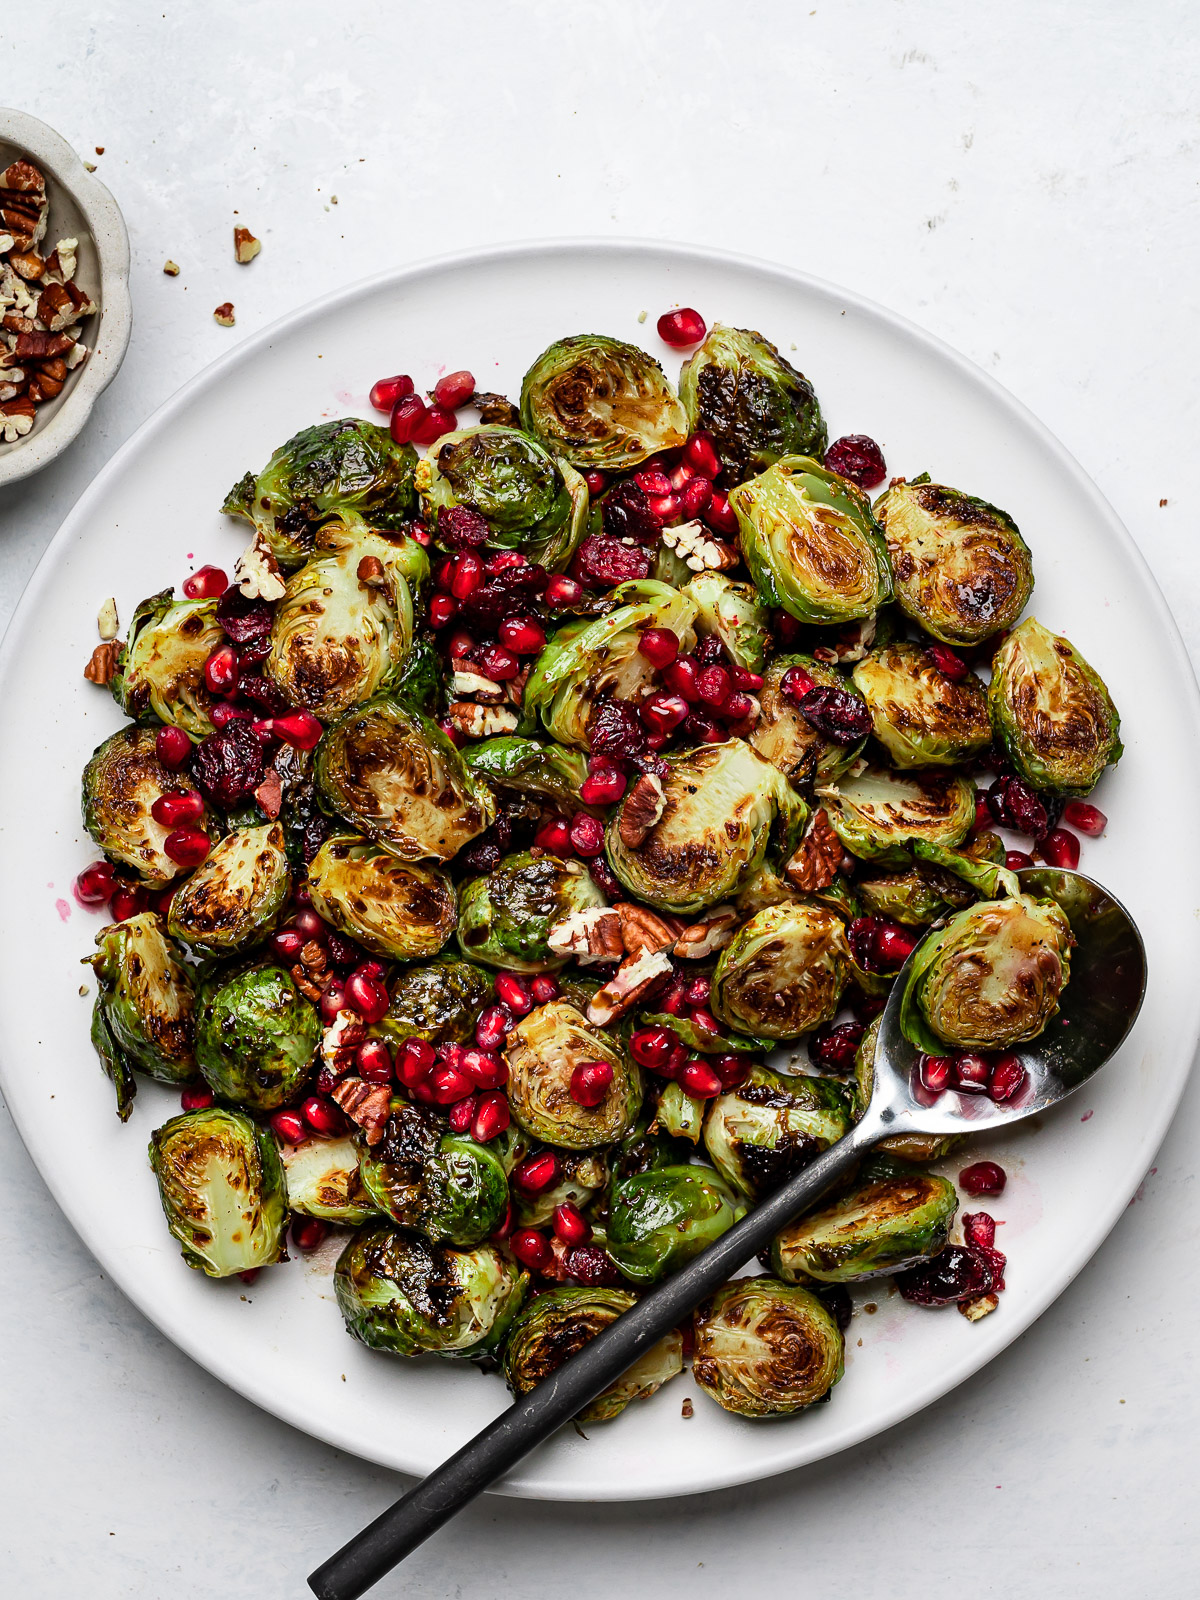 Roasted Brussels sprouts tossed with pecans, pomegranate seeds and a balsamic glaze on a platter